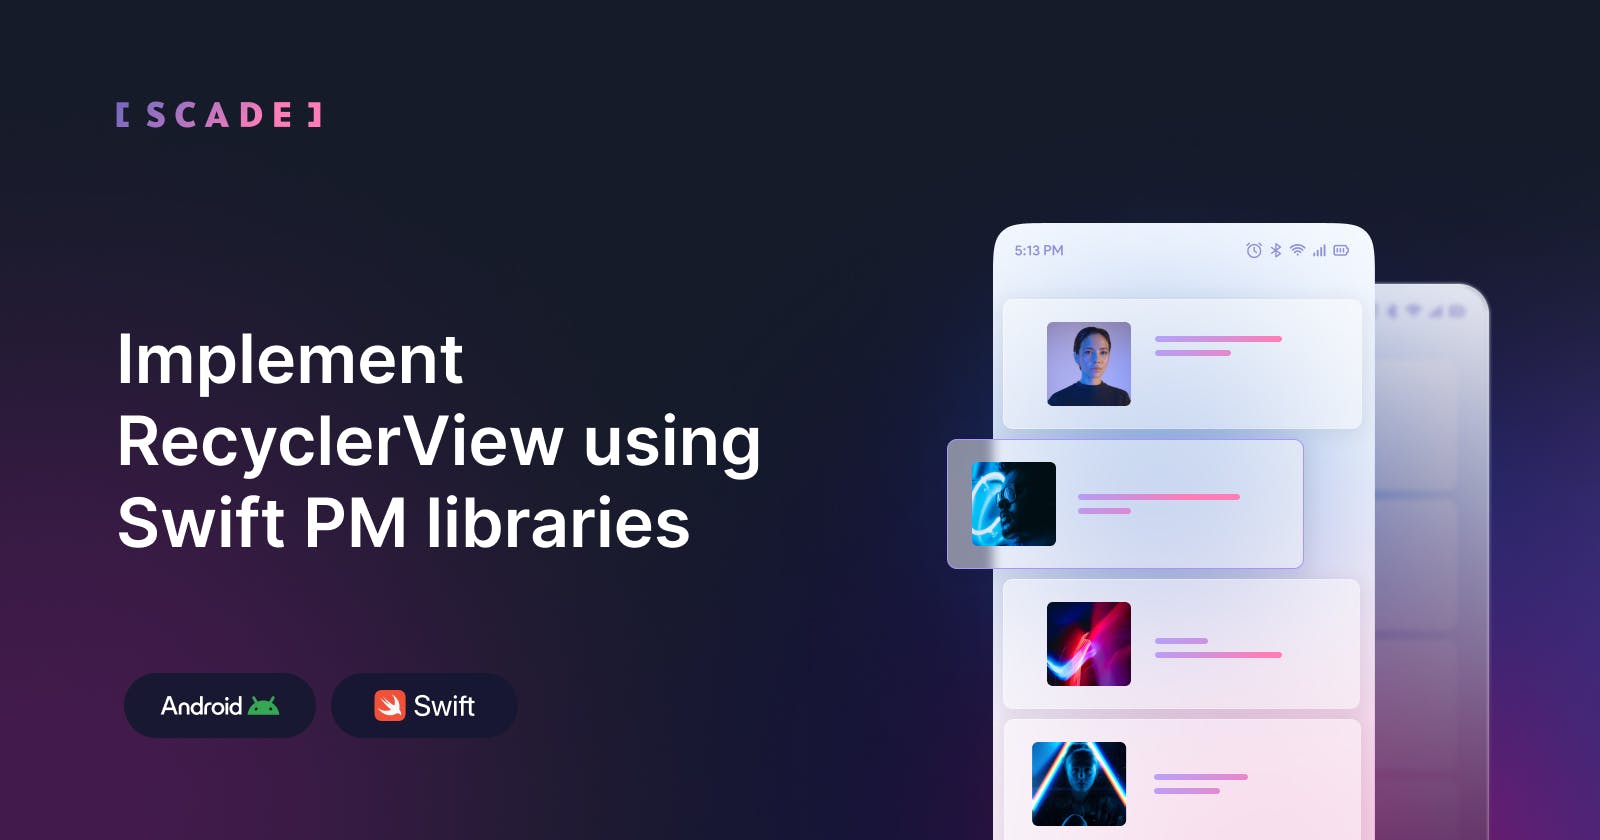 Implement RecyclerView using Swift PM libraries